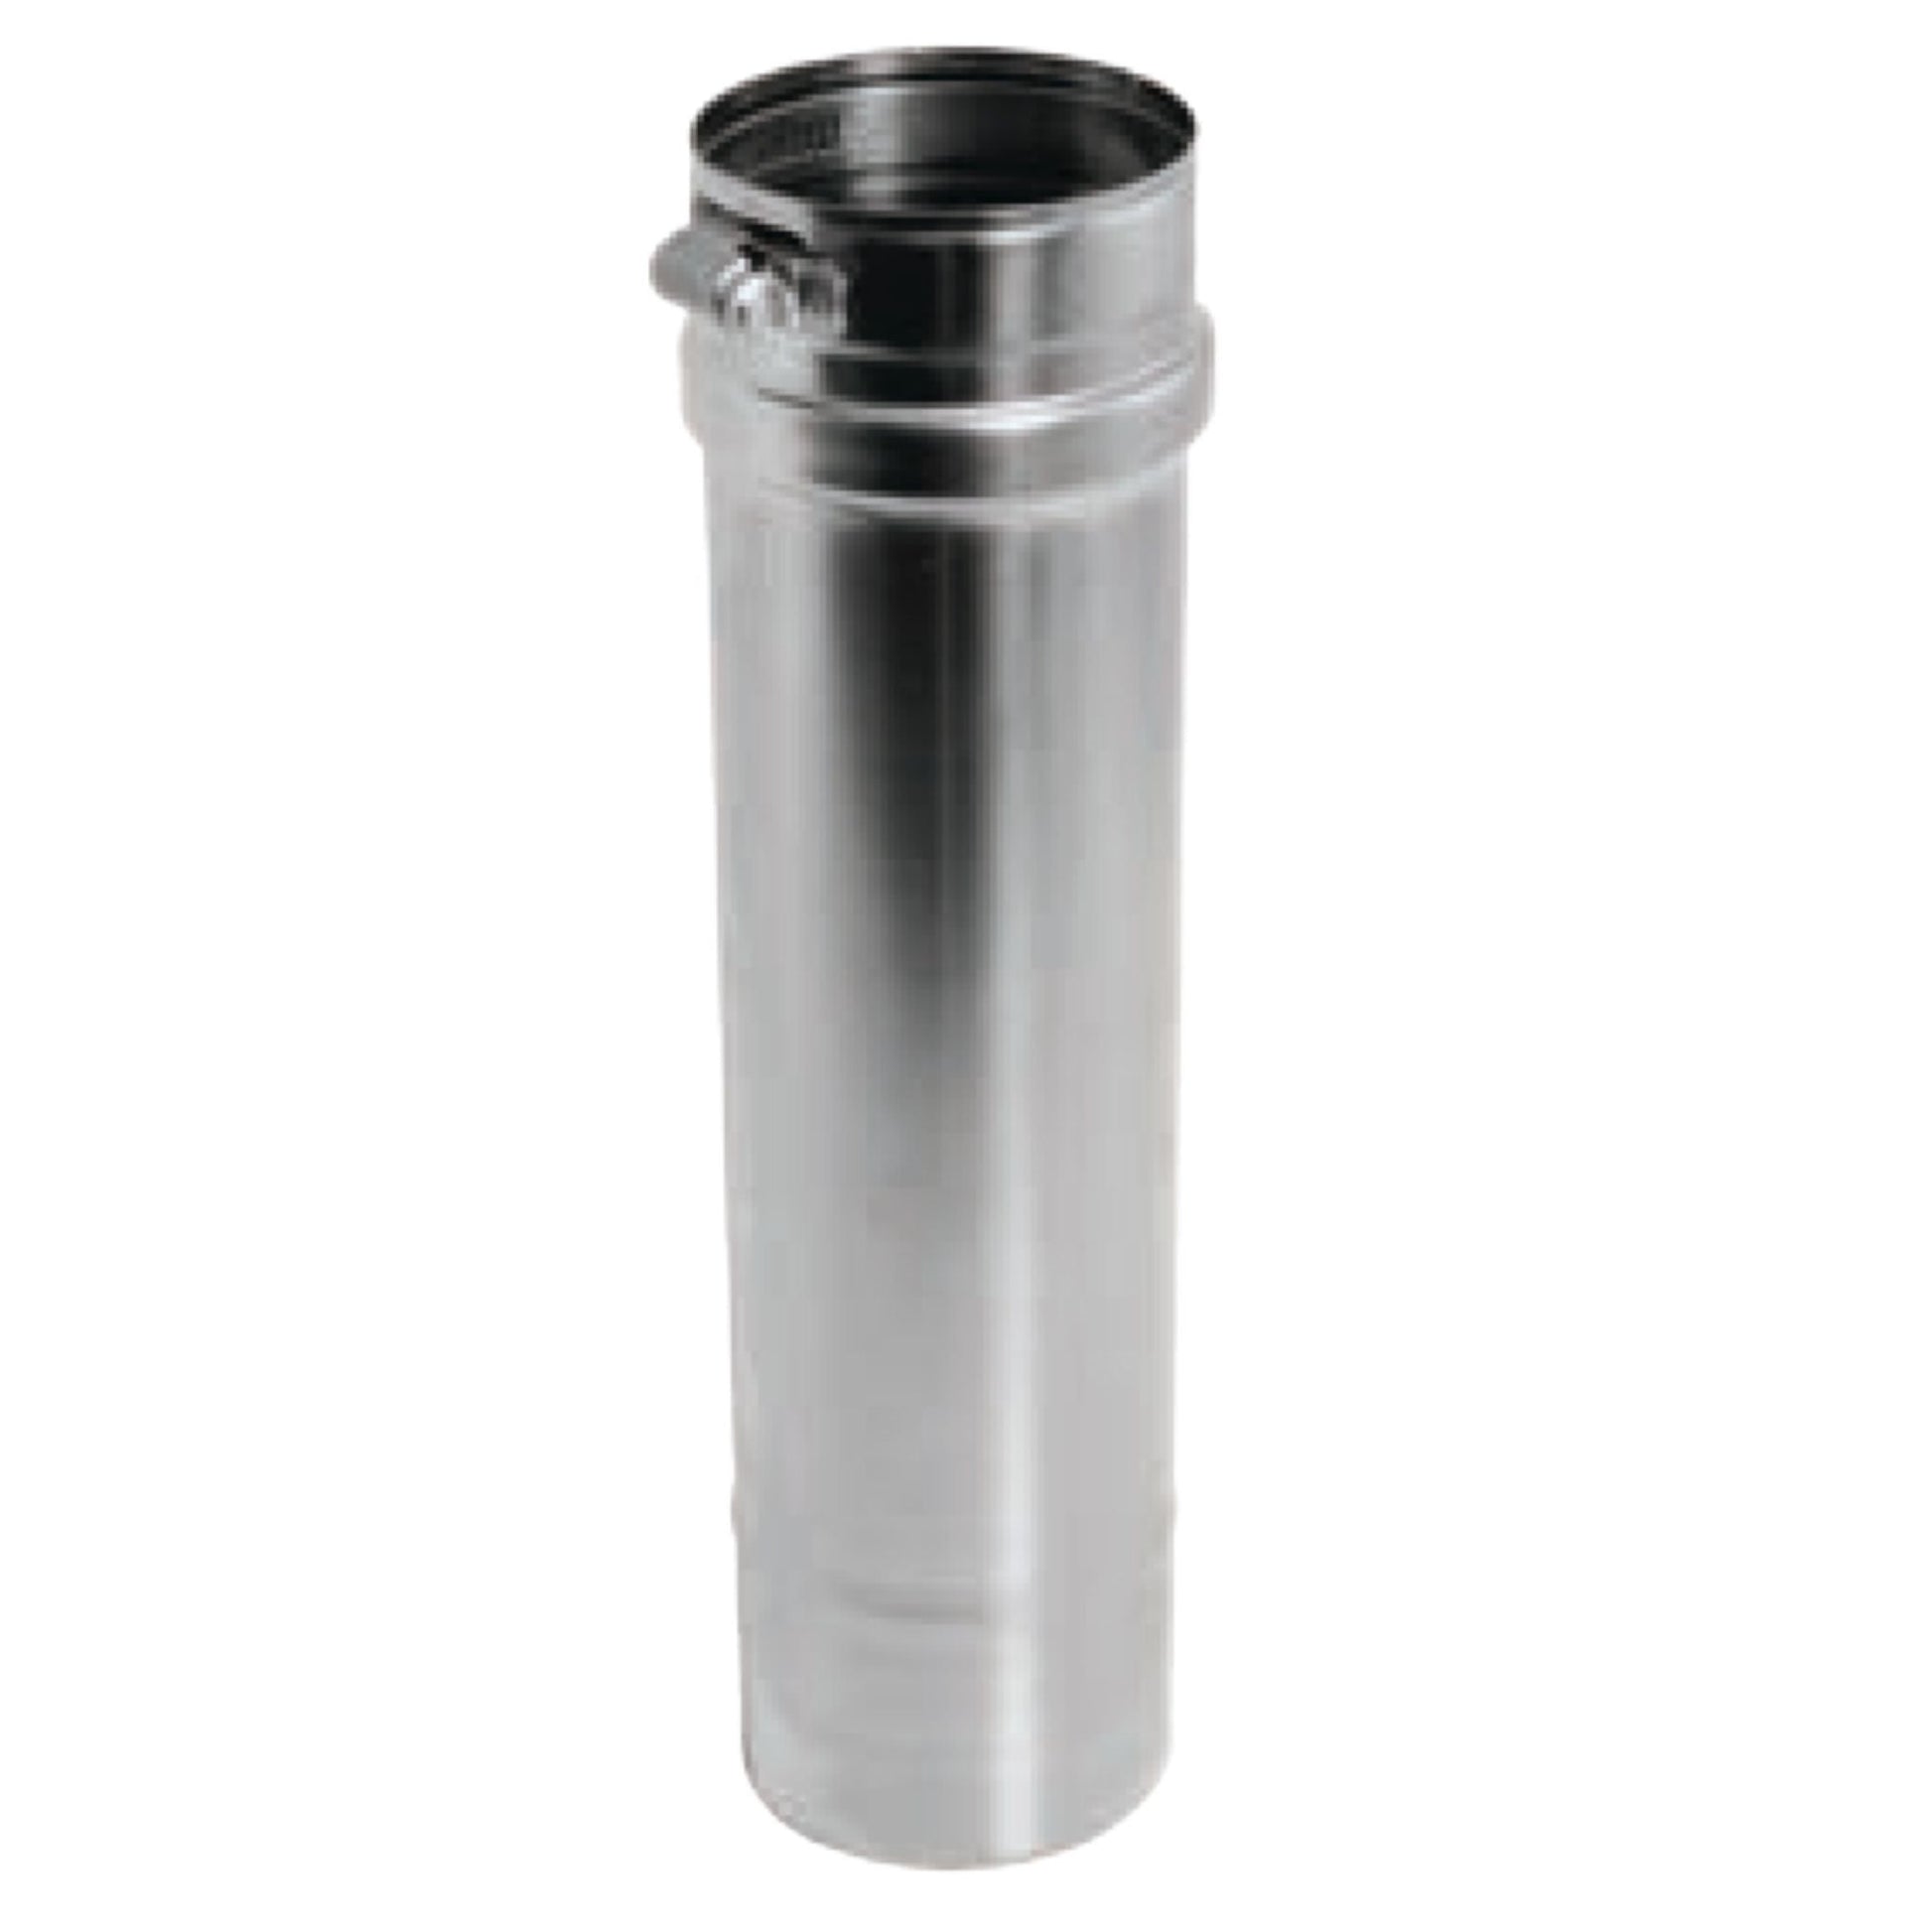 DuraVent FasNSeal 5" x 12" 316L Stainless Steel Vent Length